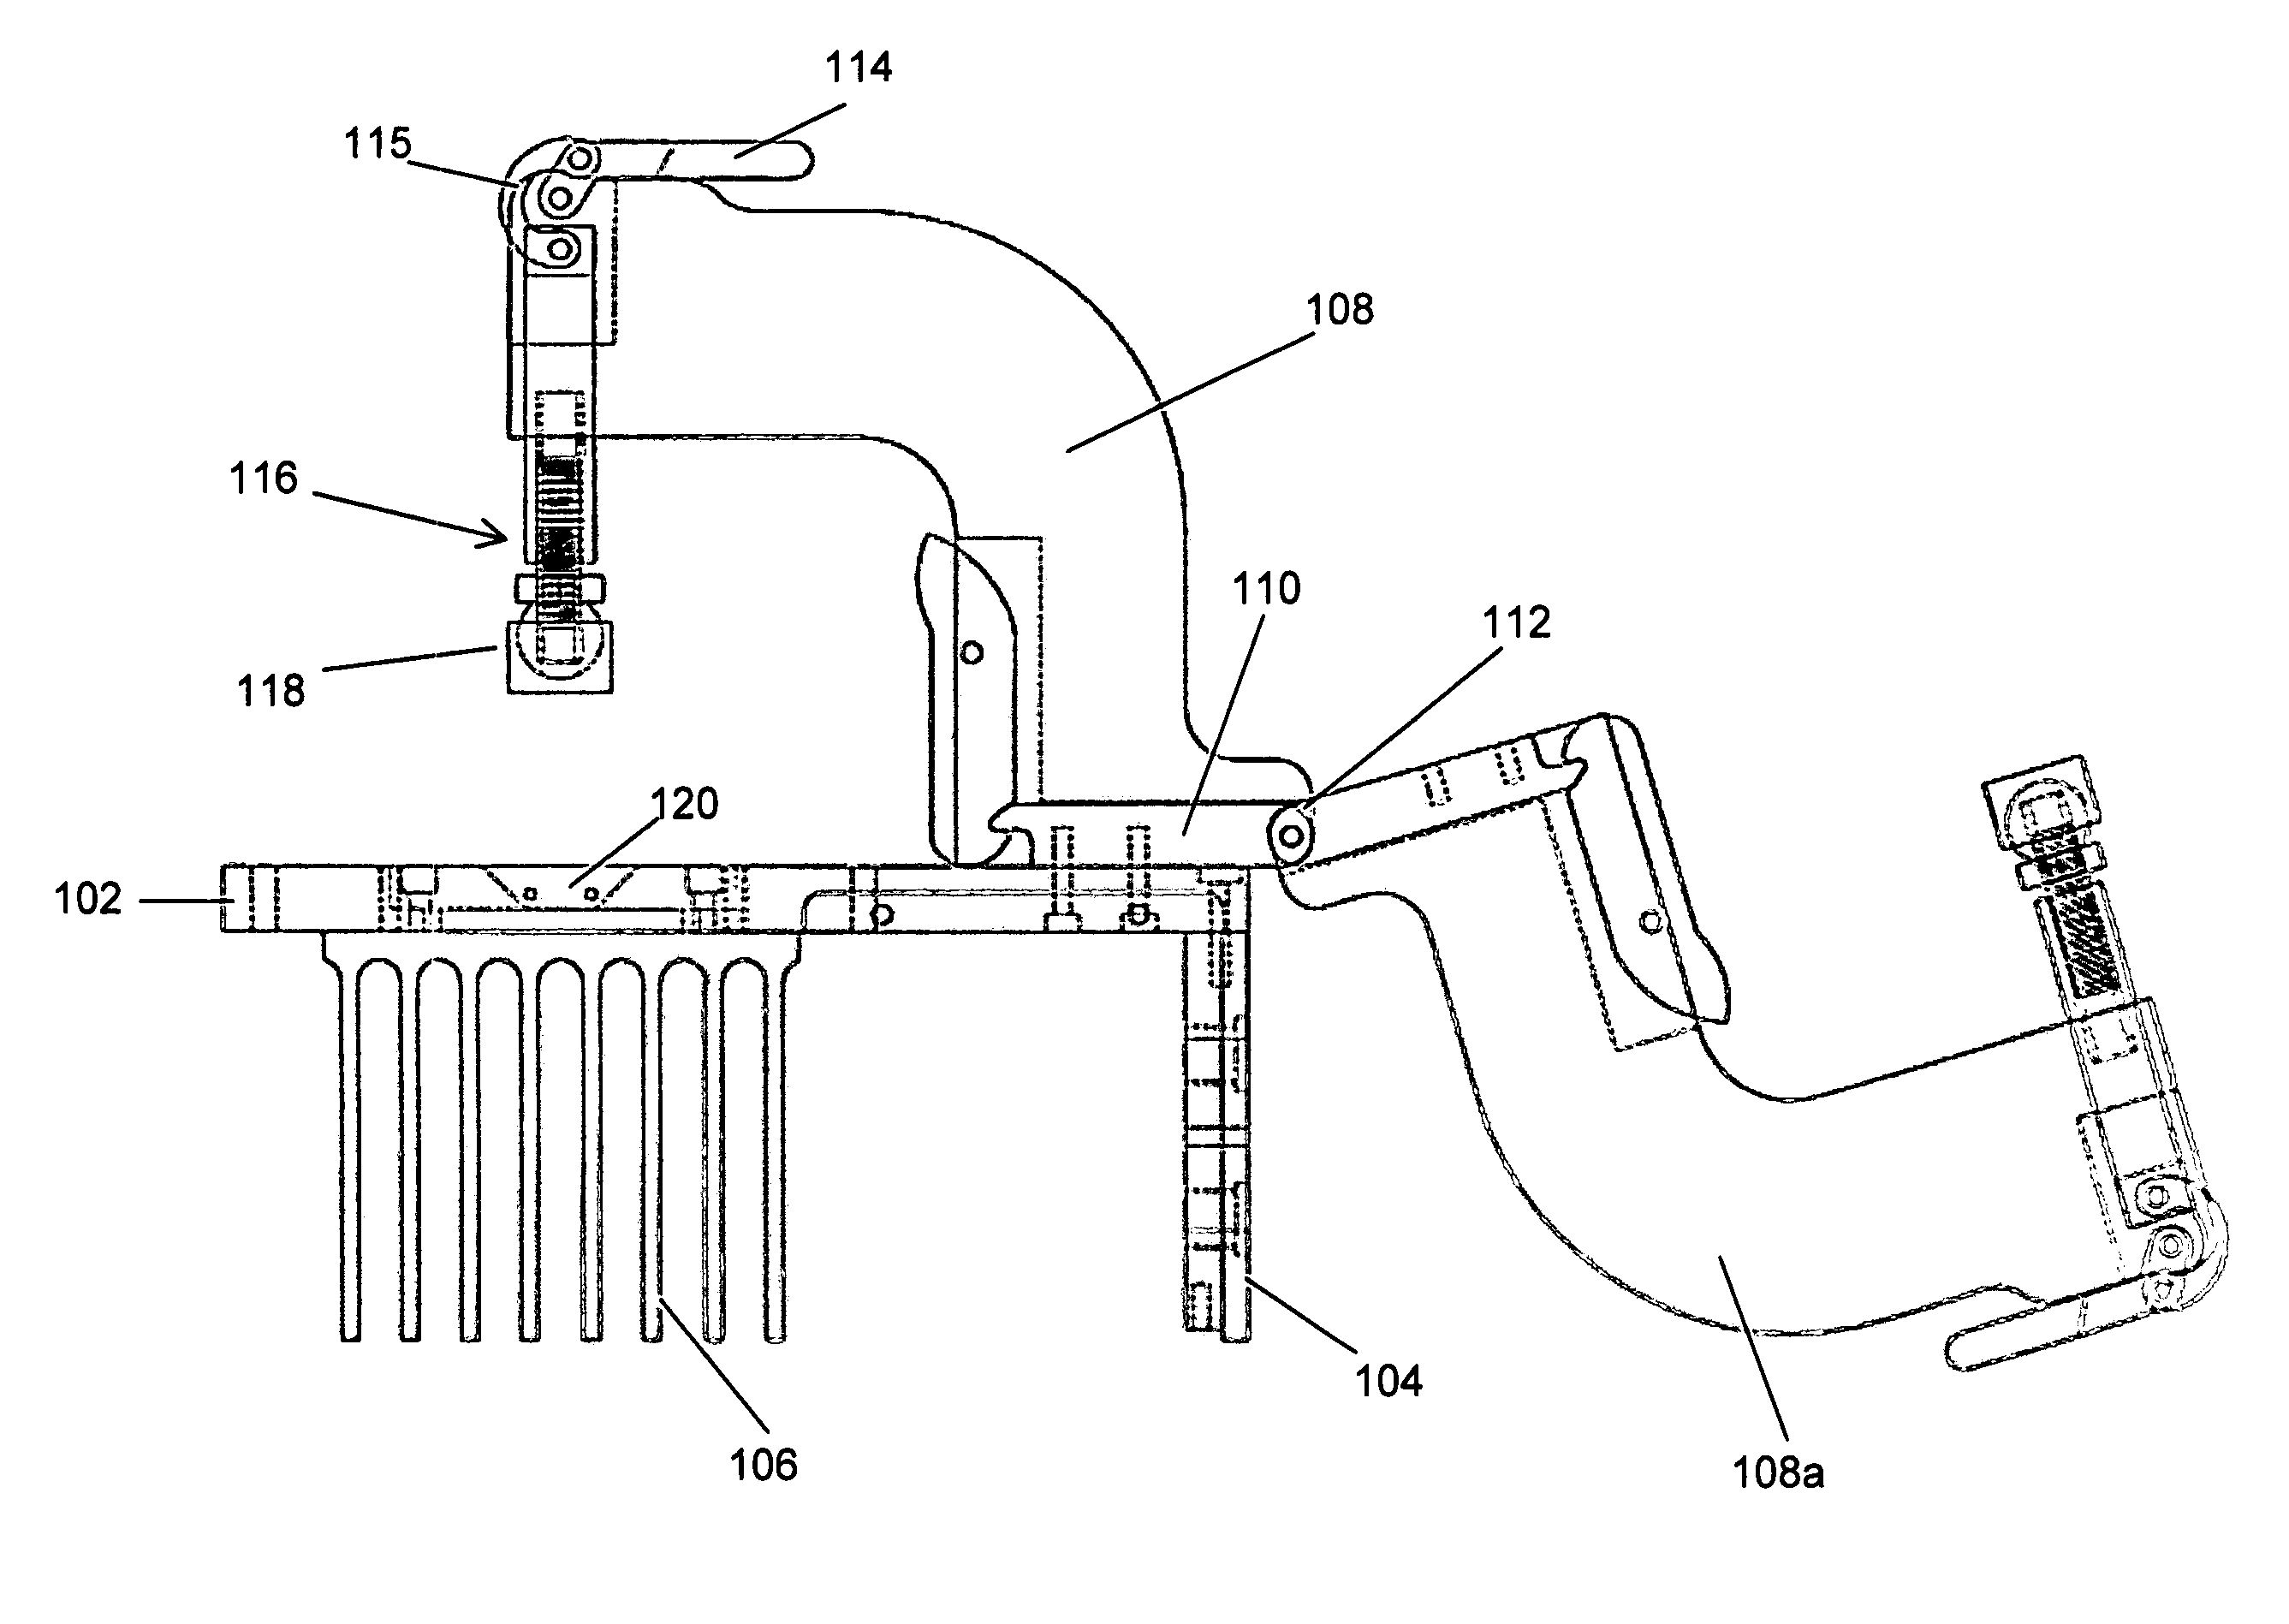 Universal test fixture for high-power packaged transistors and diodes